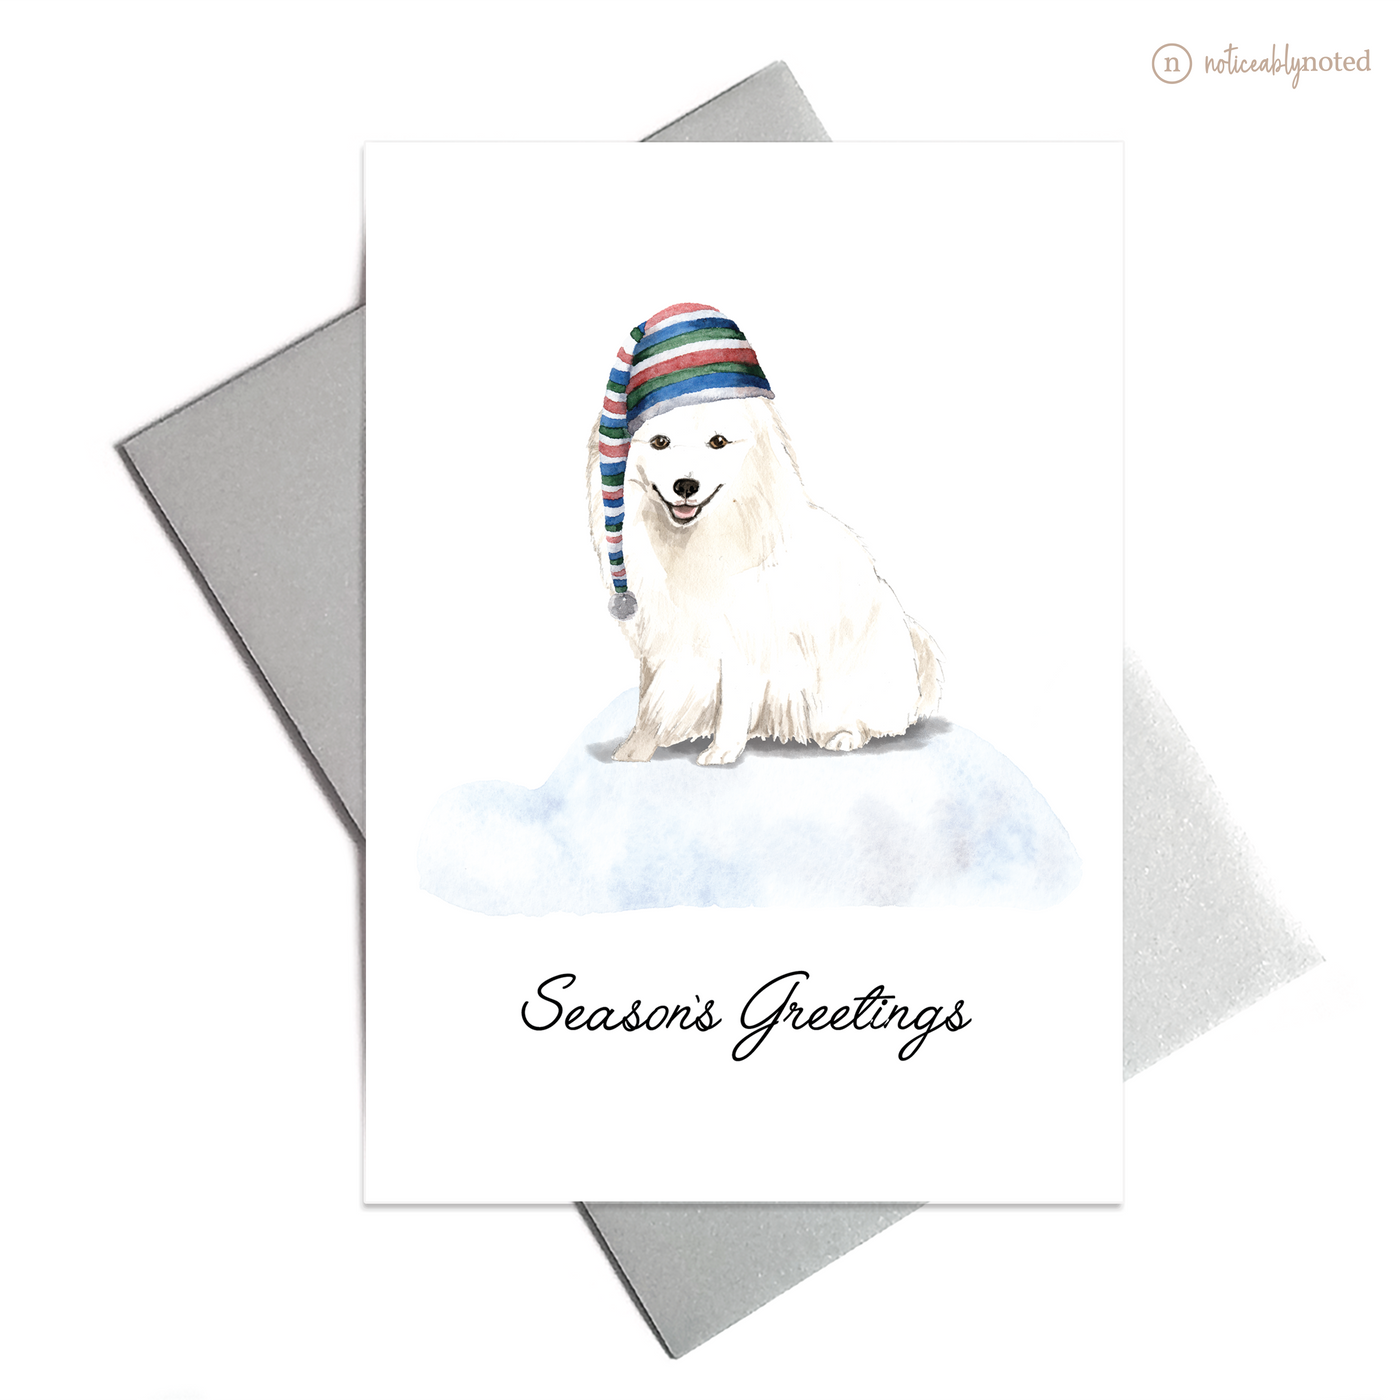 Japanese Spitz Dog Holiday Card | Noticeably Noted